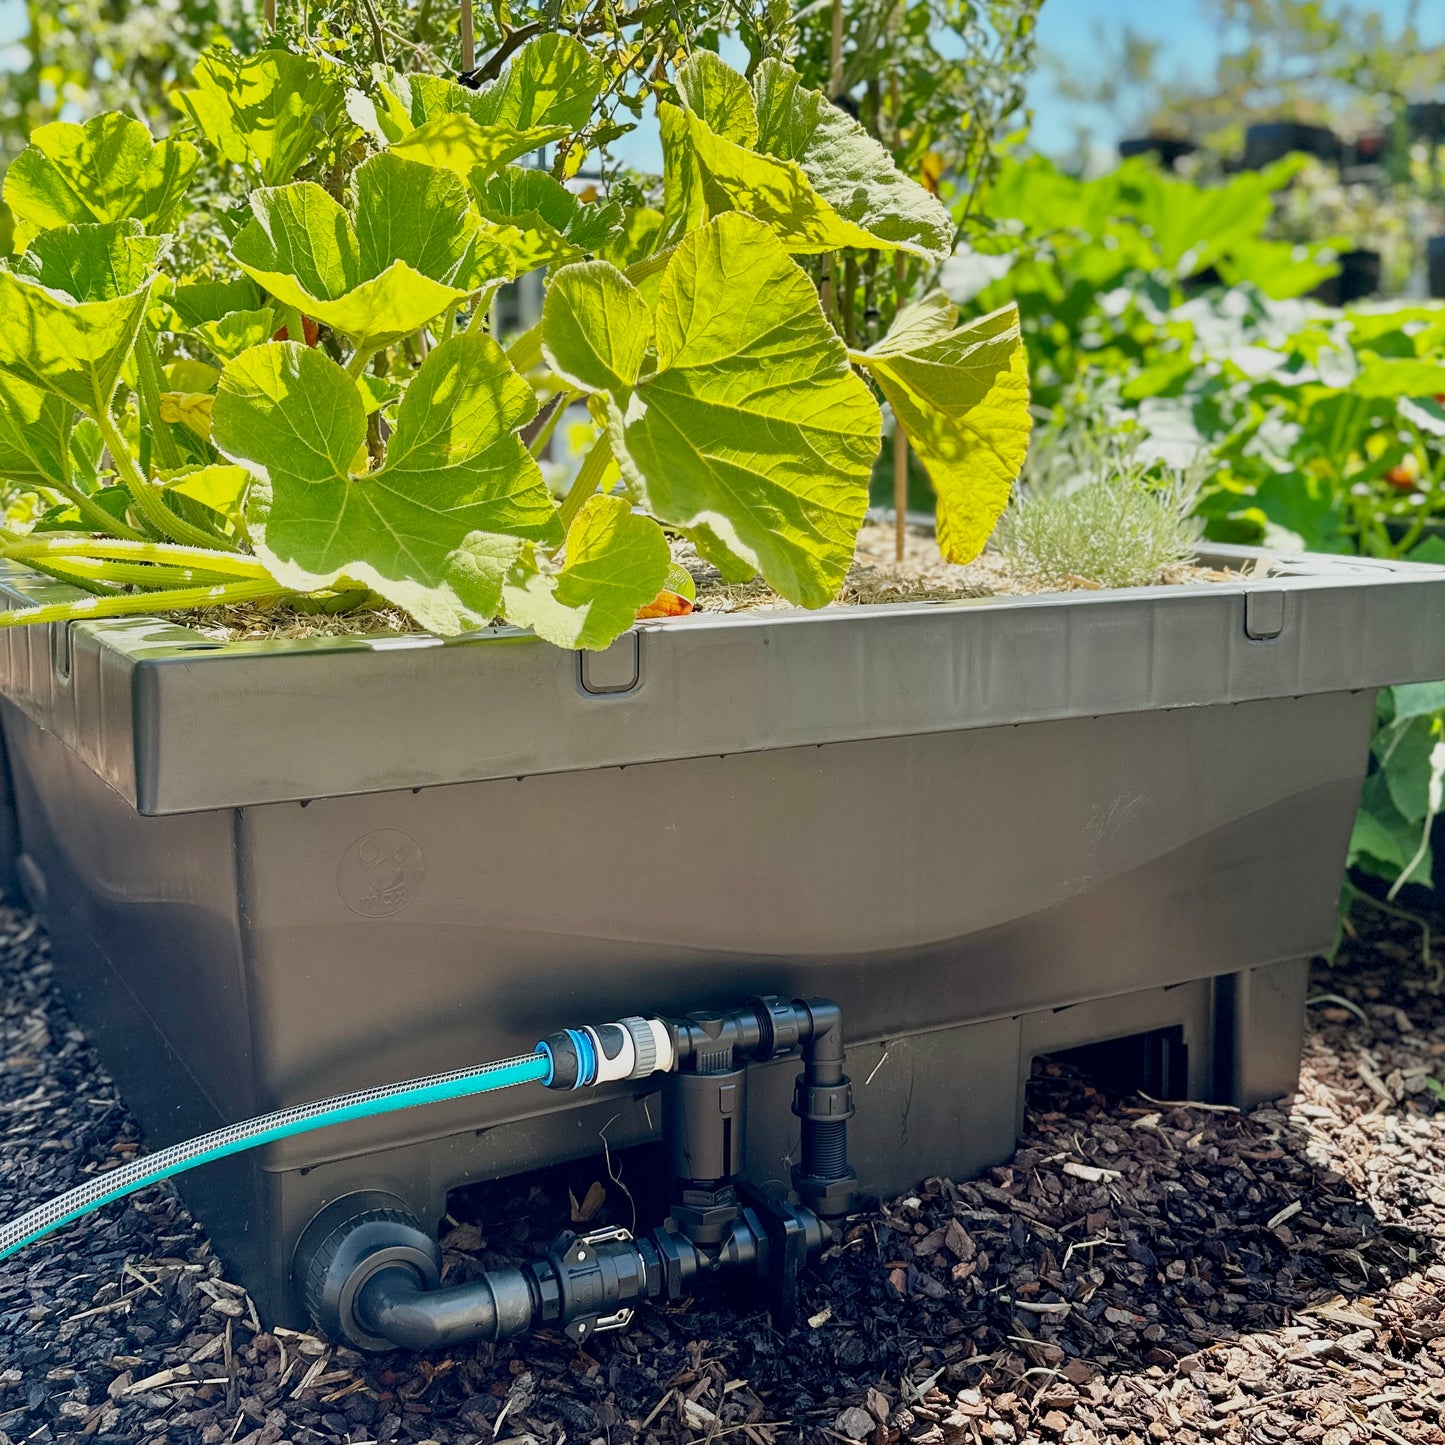 Foodcube Auto Watering System